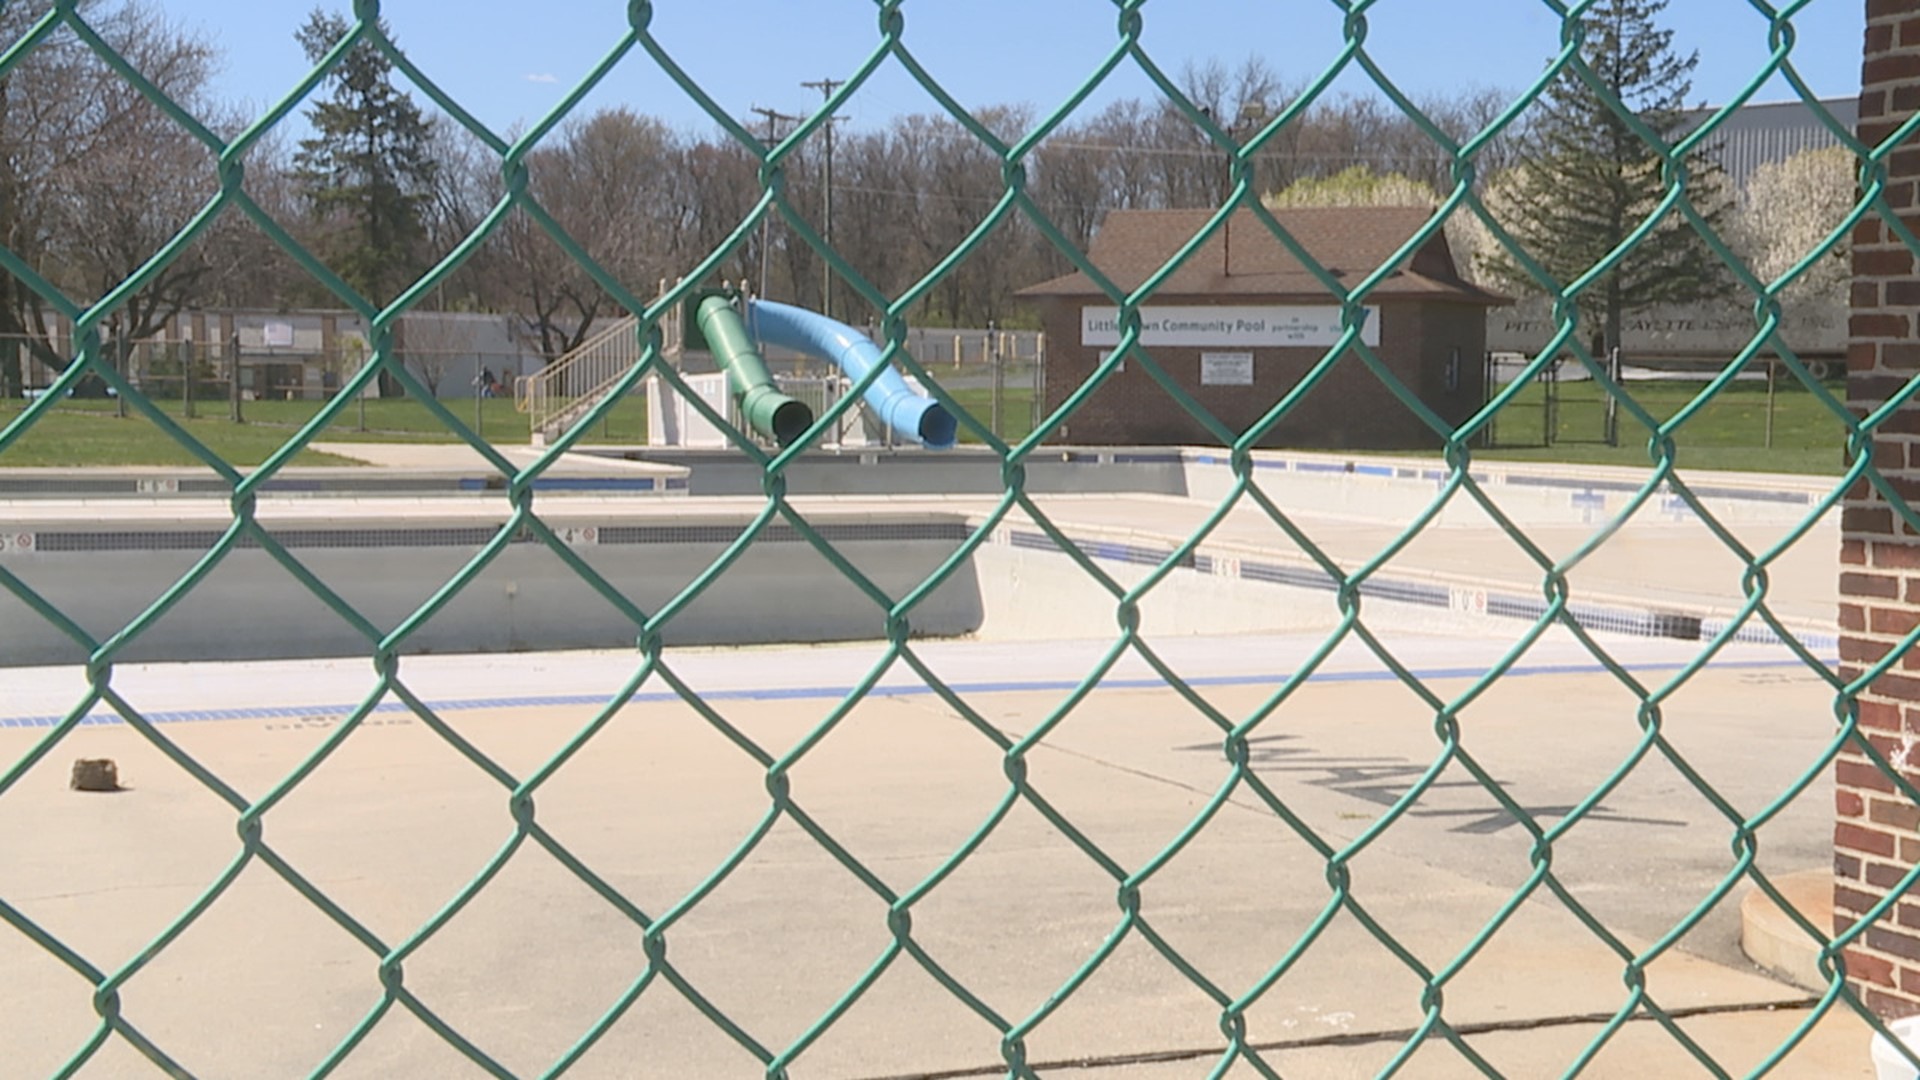 The Littlestown Community Pool is expected to be demolished after borough officials voted to permanently close the pool back in December.